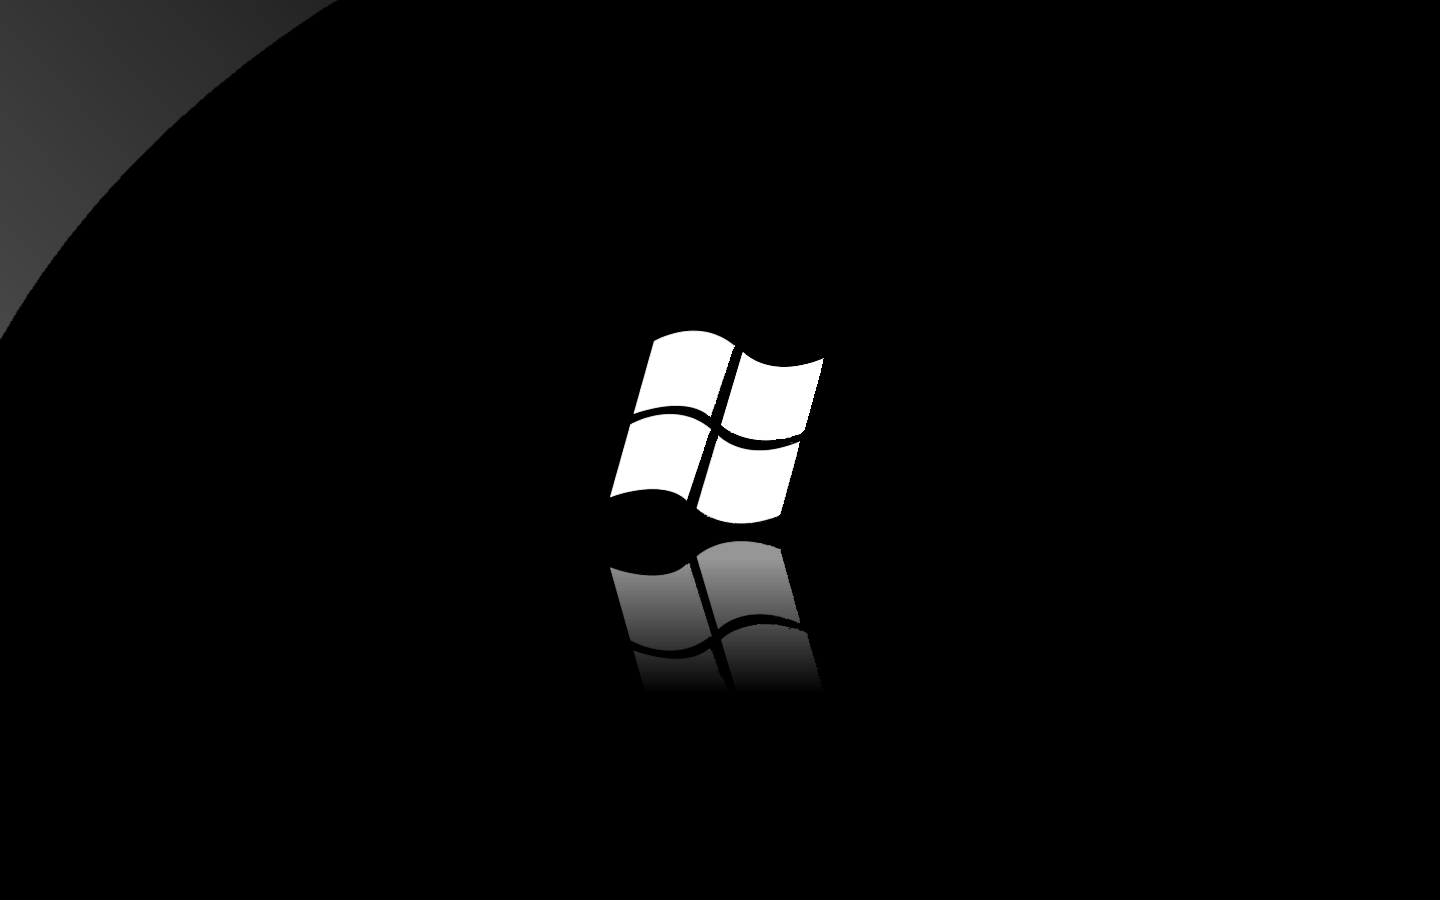 Cool Microsoft Wallpapers - Top Free Cool Microsoft Backgrounds ...